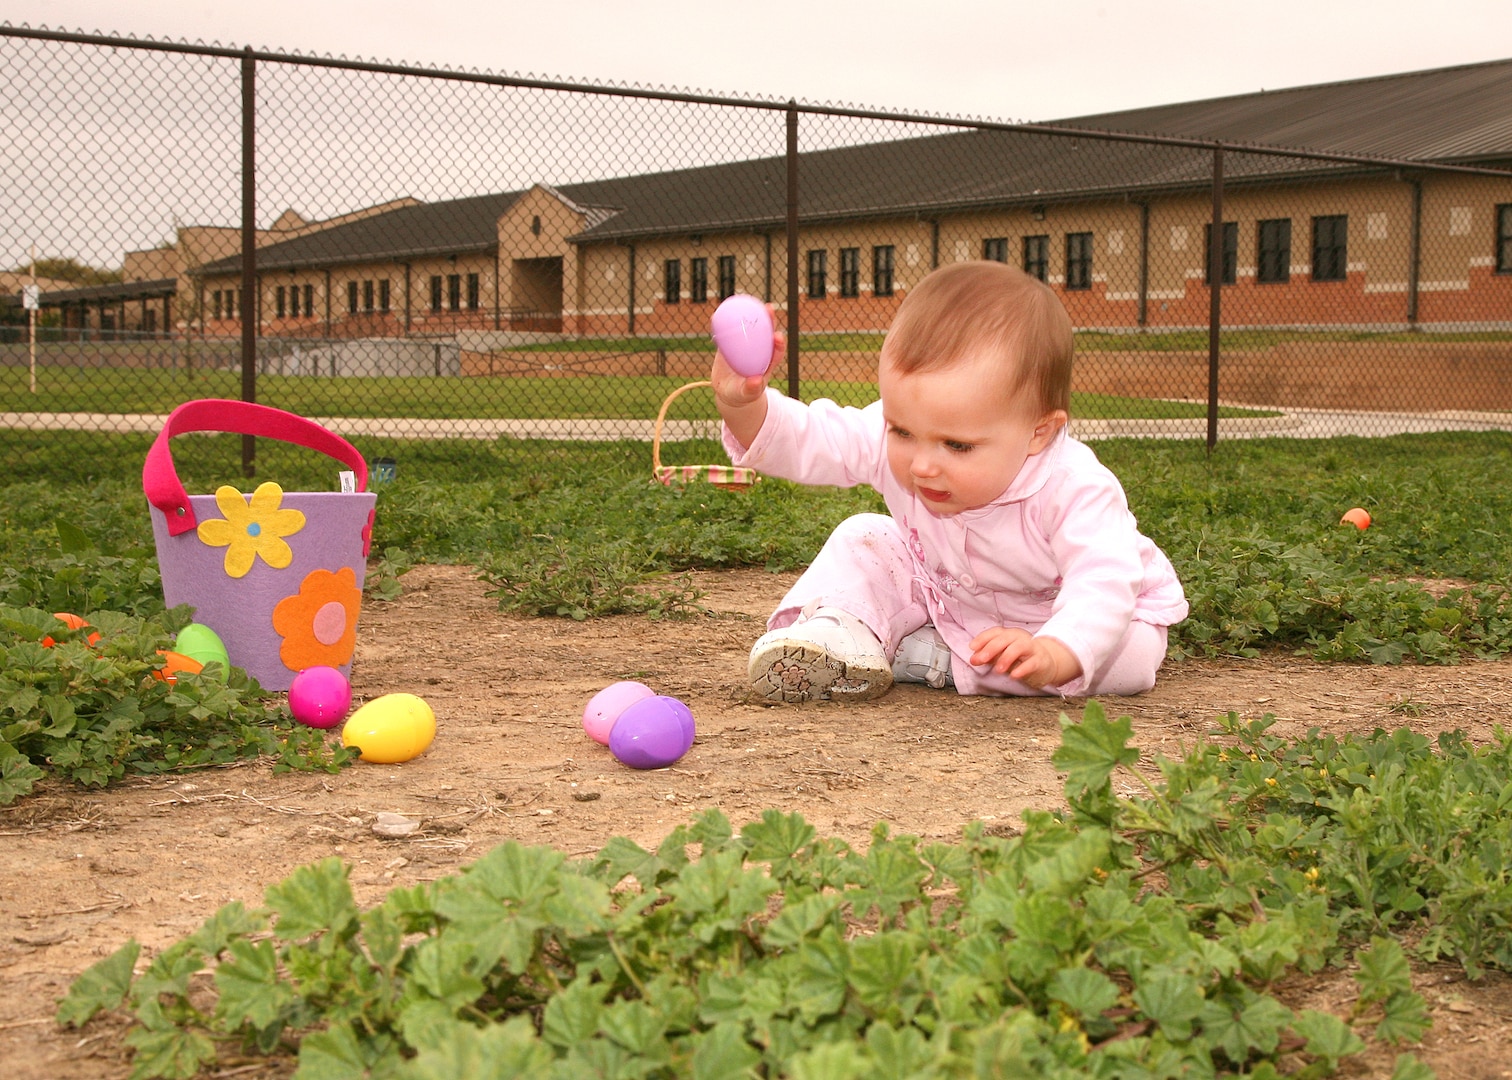 Zelany Conger picks up eggs during the Easter egg hunt at the Lackland Youth Center March 27. The FitFamily event included a healthy recipe contest and a free spaghetti luncheon. Zelany is the daughter of Staff Sgt. Travis Conger, 343rd Training Squadron. (U.S. Air Force photo/Robbin Cresswell)